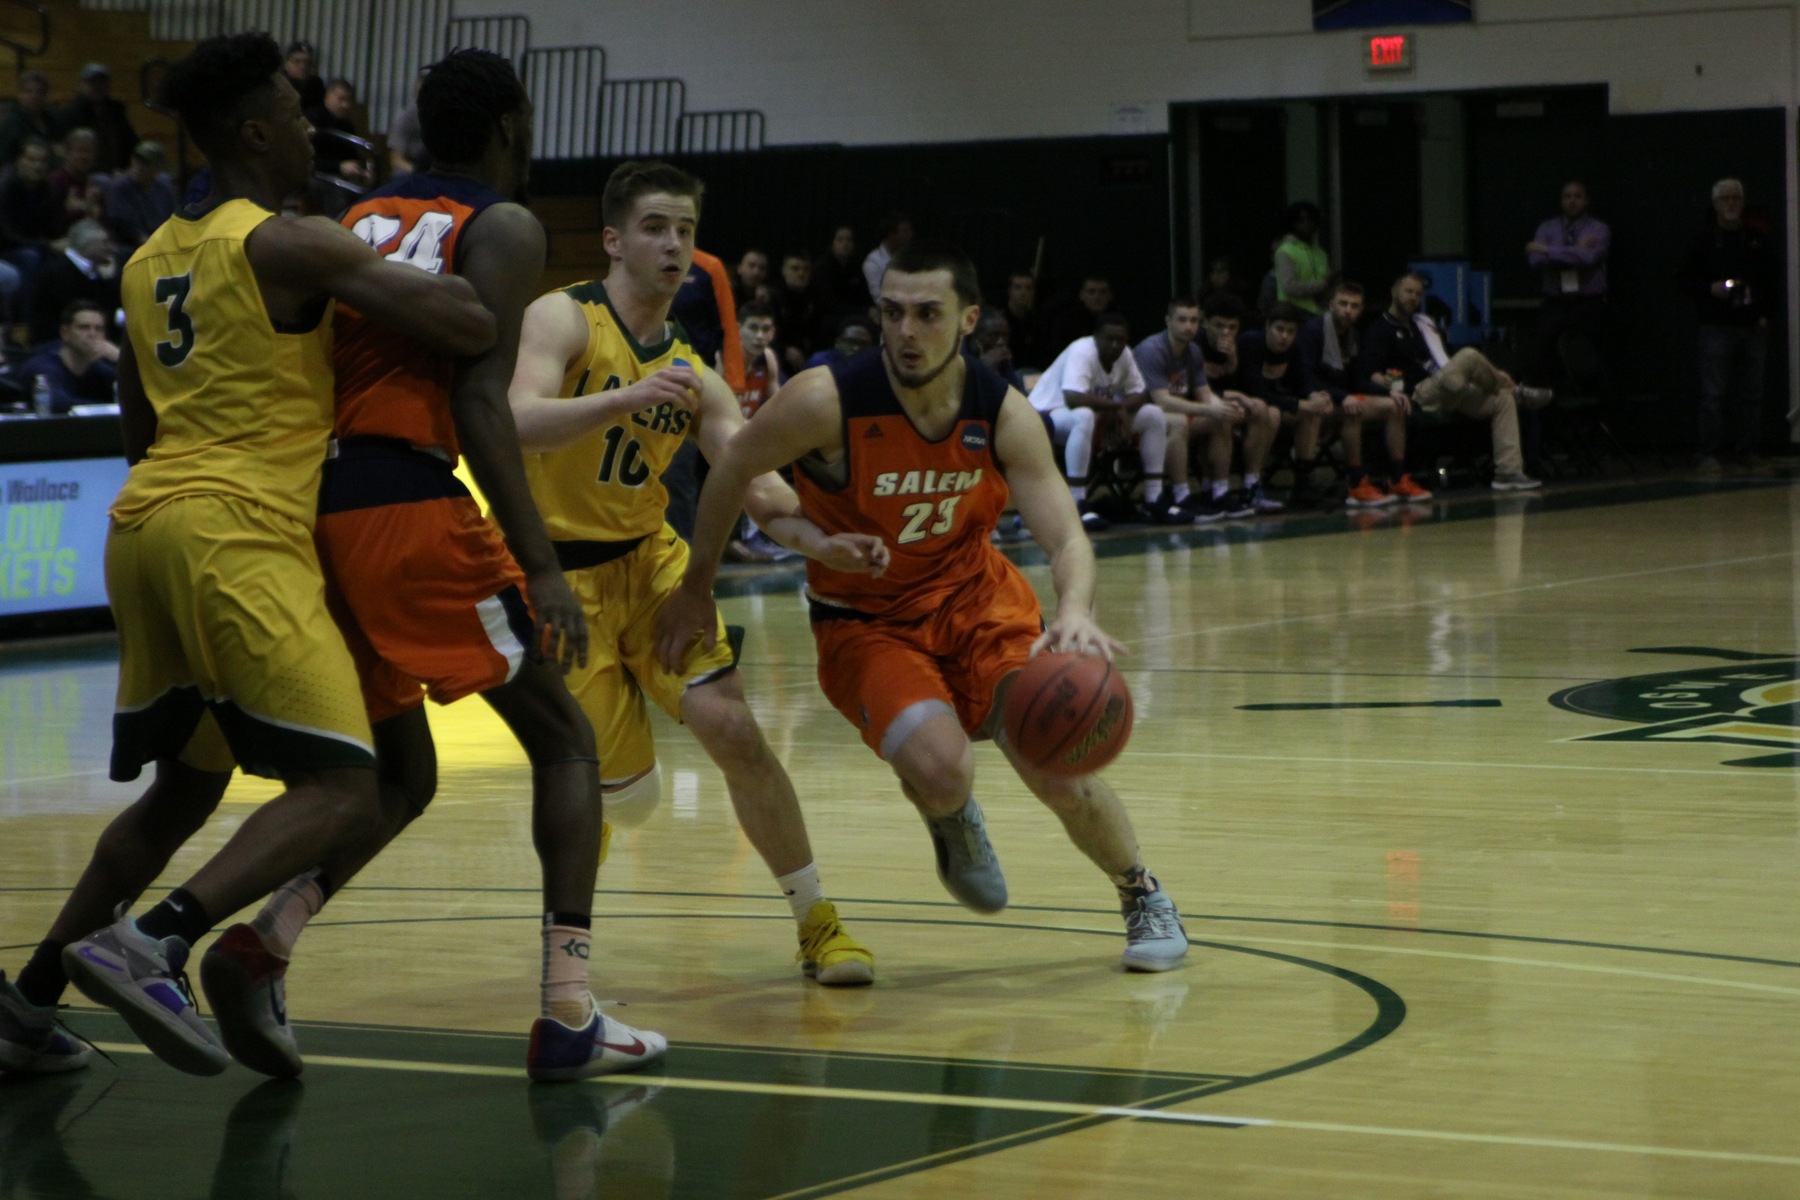 Oswego State Tops Salem State 72-59 in NCAA Tournament Opening Round